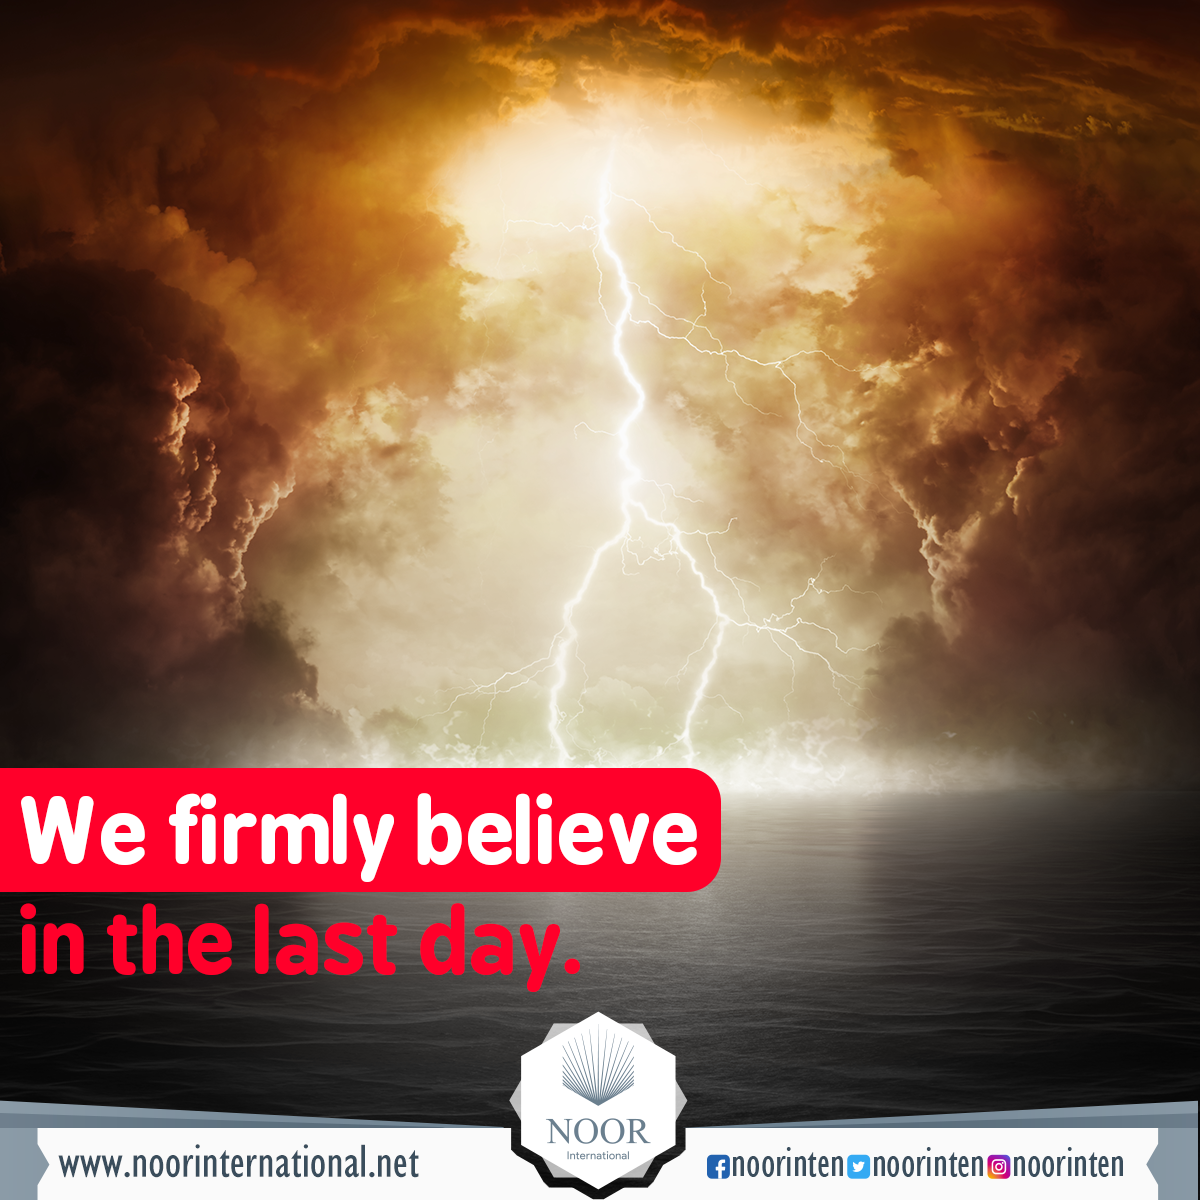 We firmly believe in the last day.